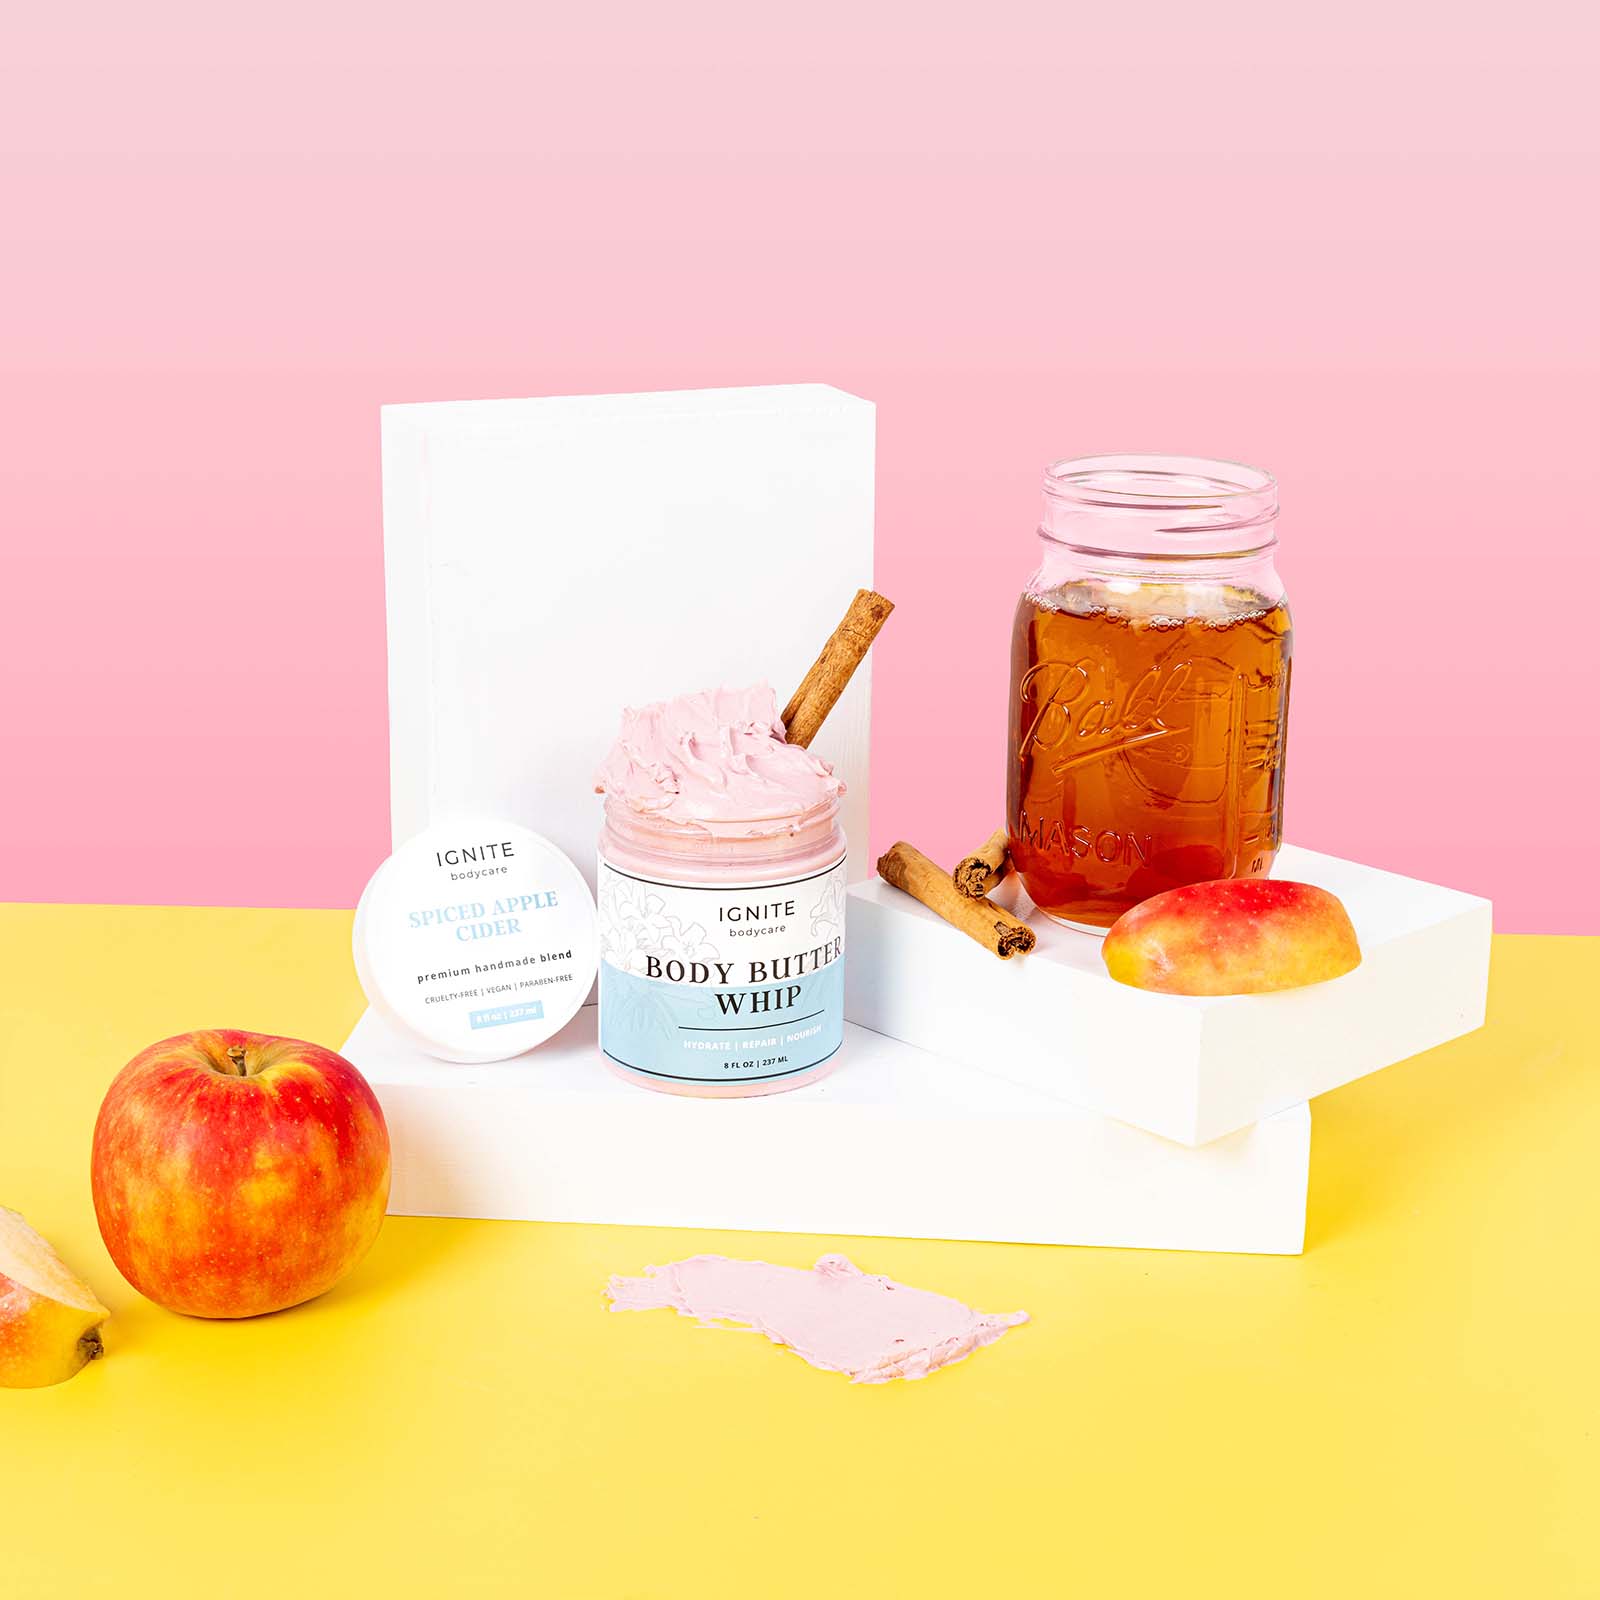 Colourful Content Creation for a Skincare Brand. Styled Product Photography by Megzie Makes